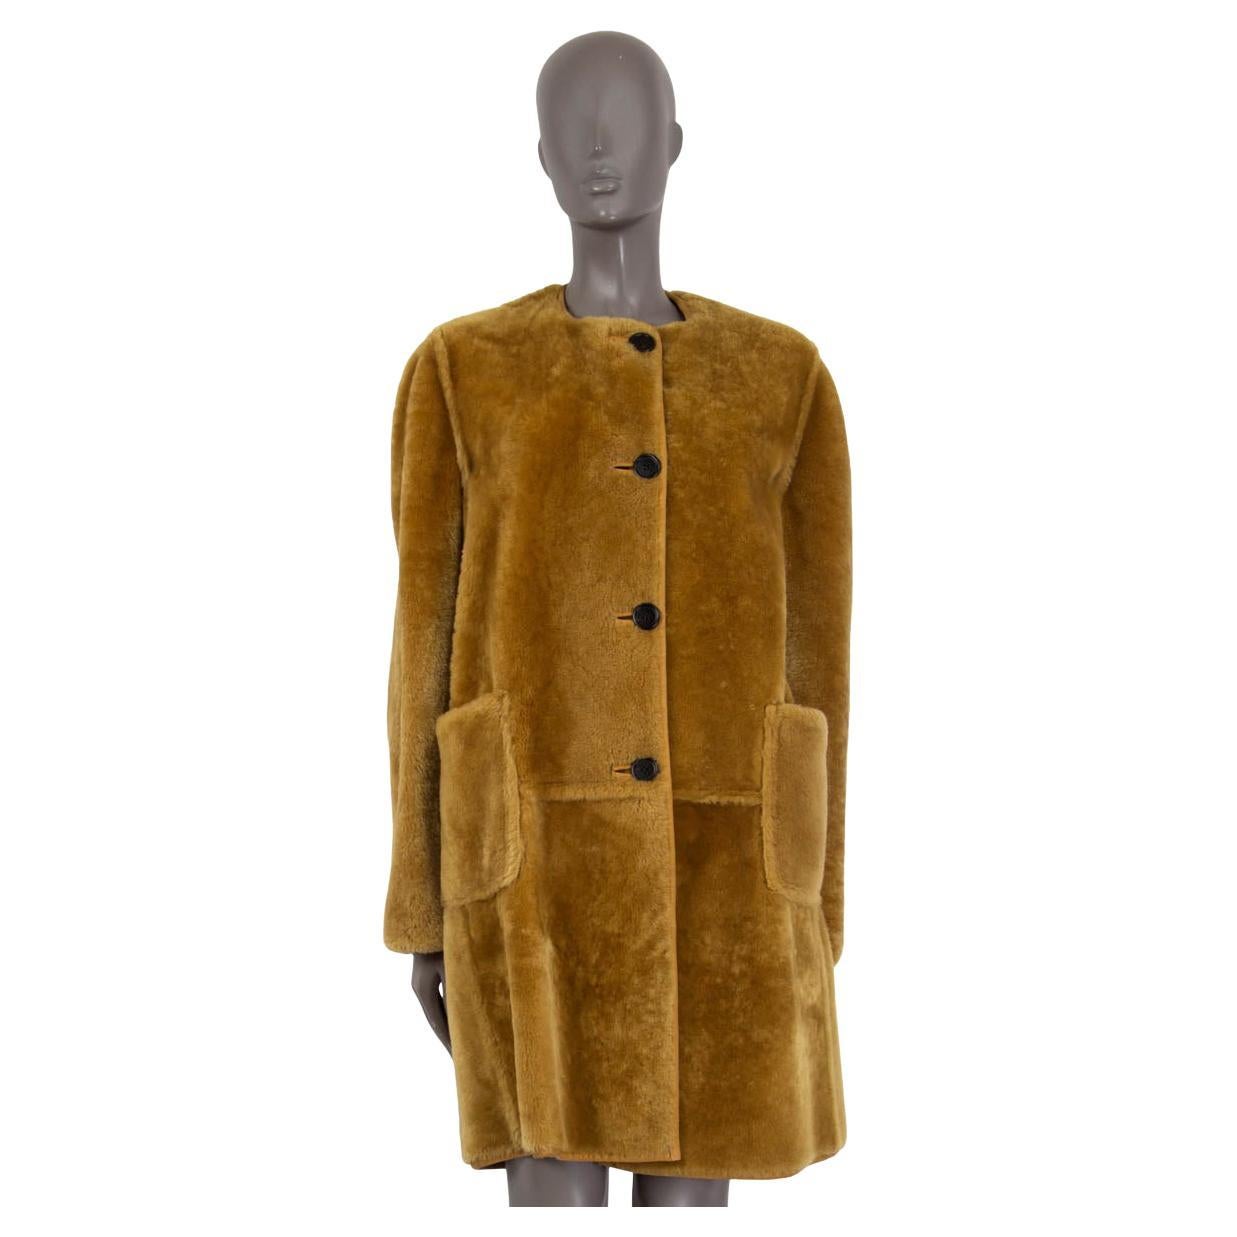 MARNI mustard yellow REVERSIBLE SHEARLING & LEATHER Coat Jacket 46 XL For Sale